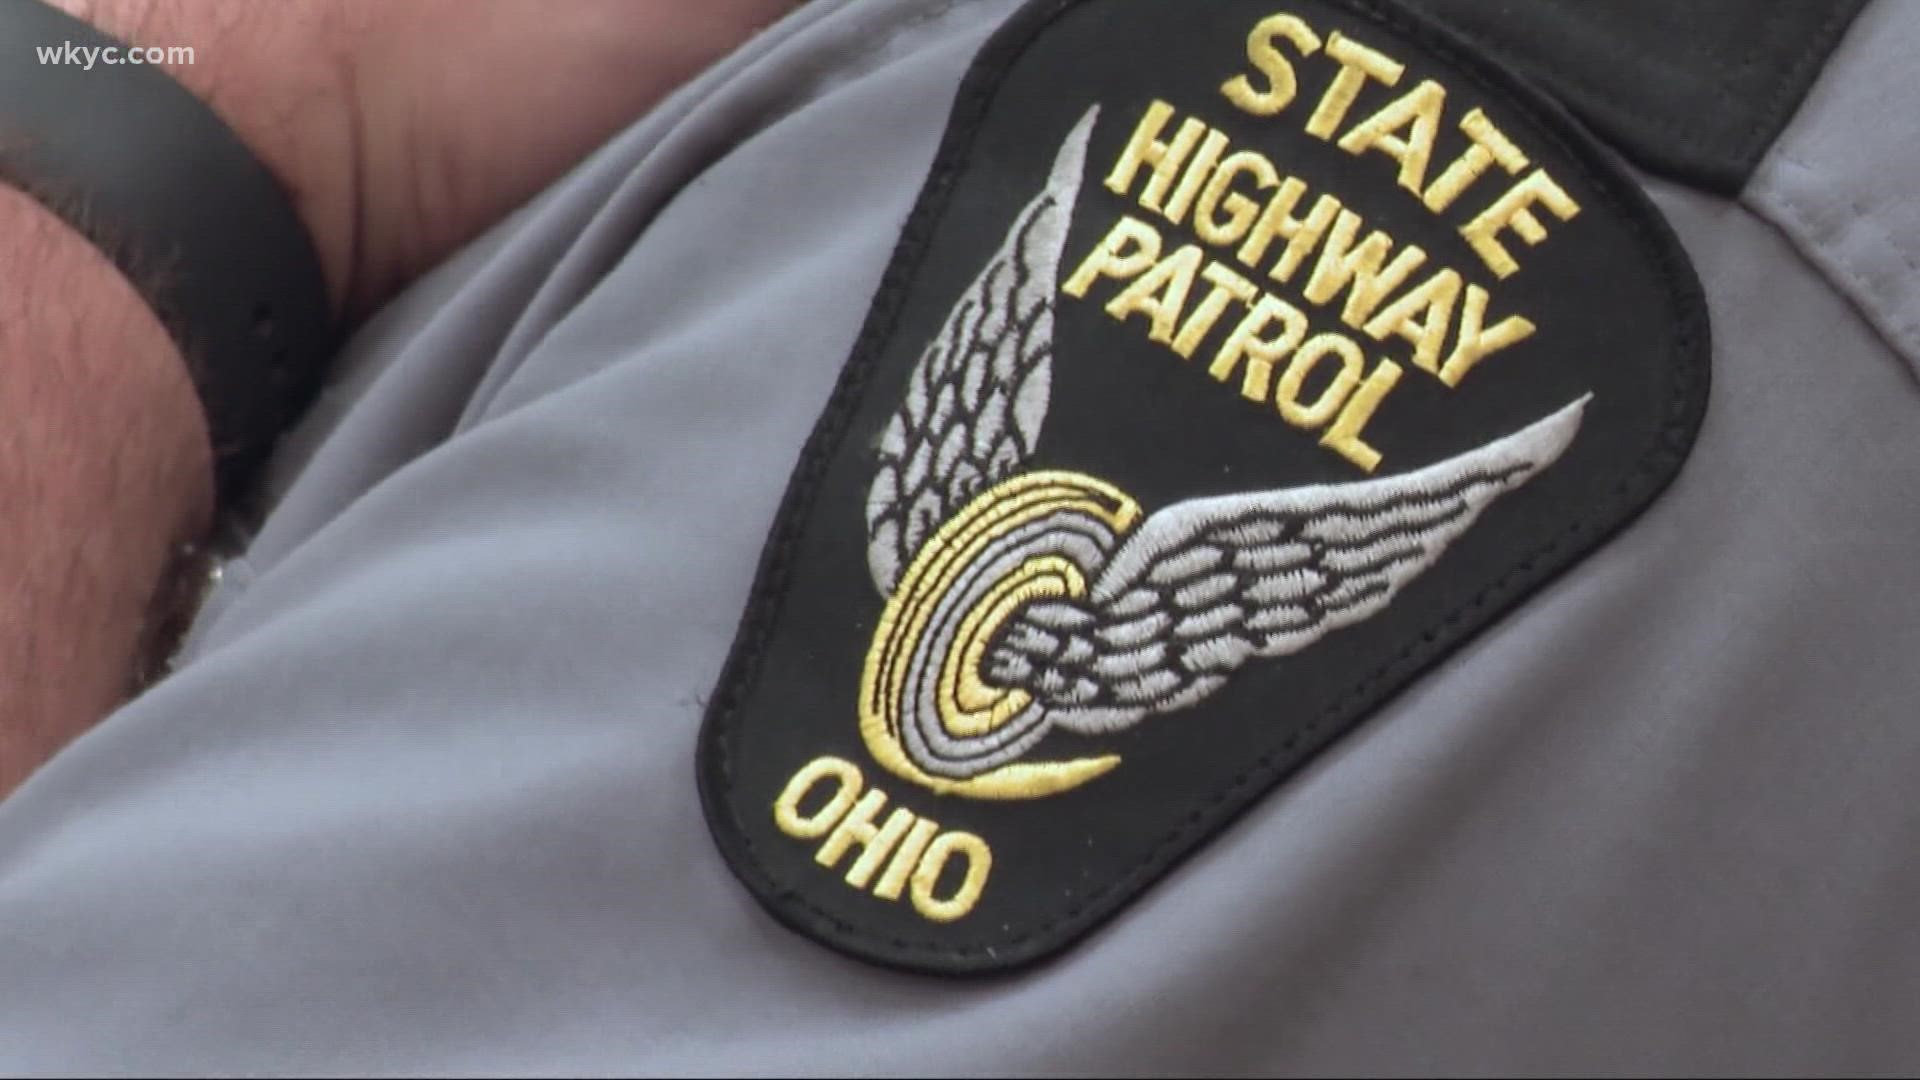 It's a partnership between the Ohio State Highway Patrol and El Centro. 3News' Marisa Saenz reports.